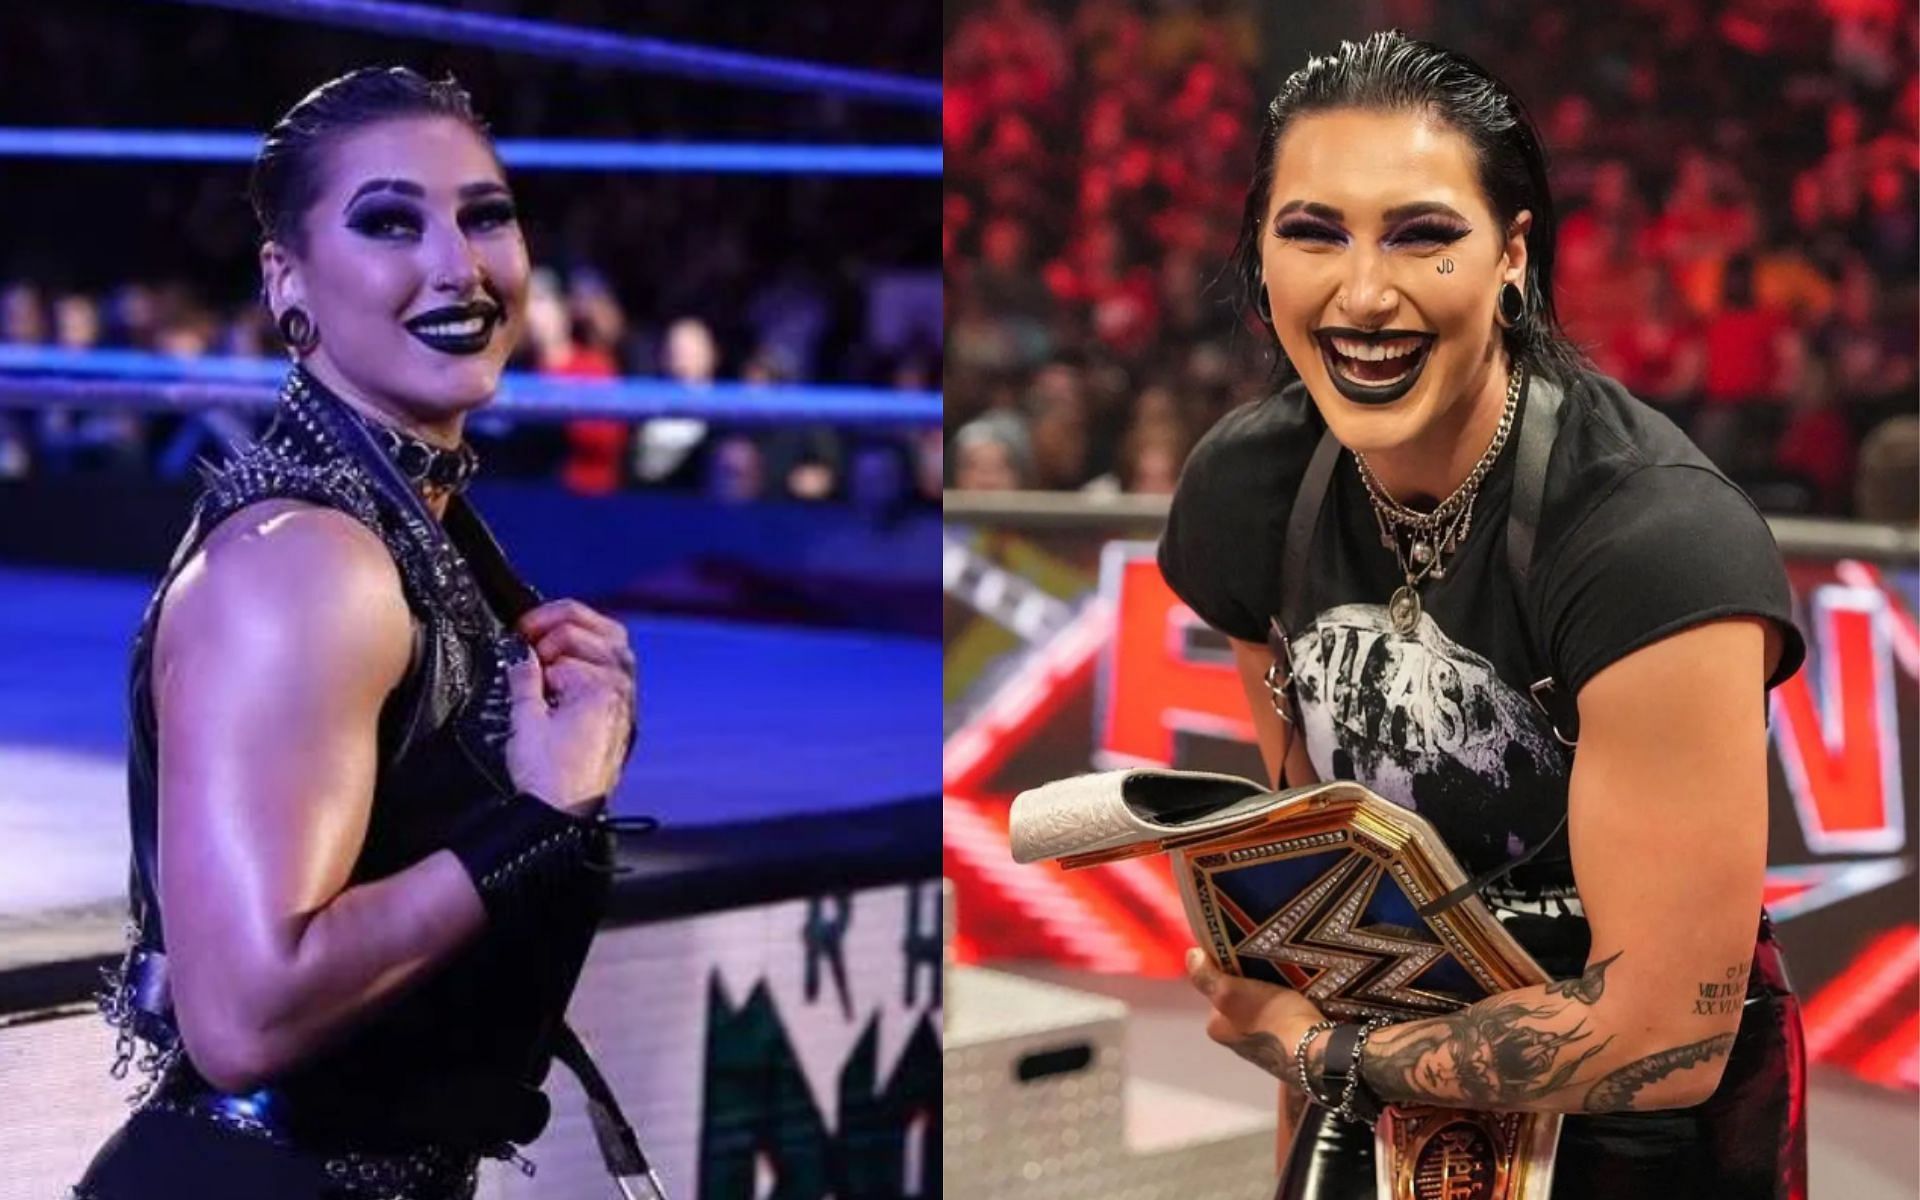 Rhea Ripley has sent a bold message across the male and female divisions in WWE